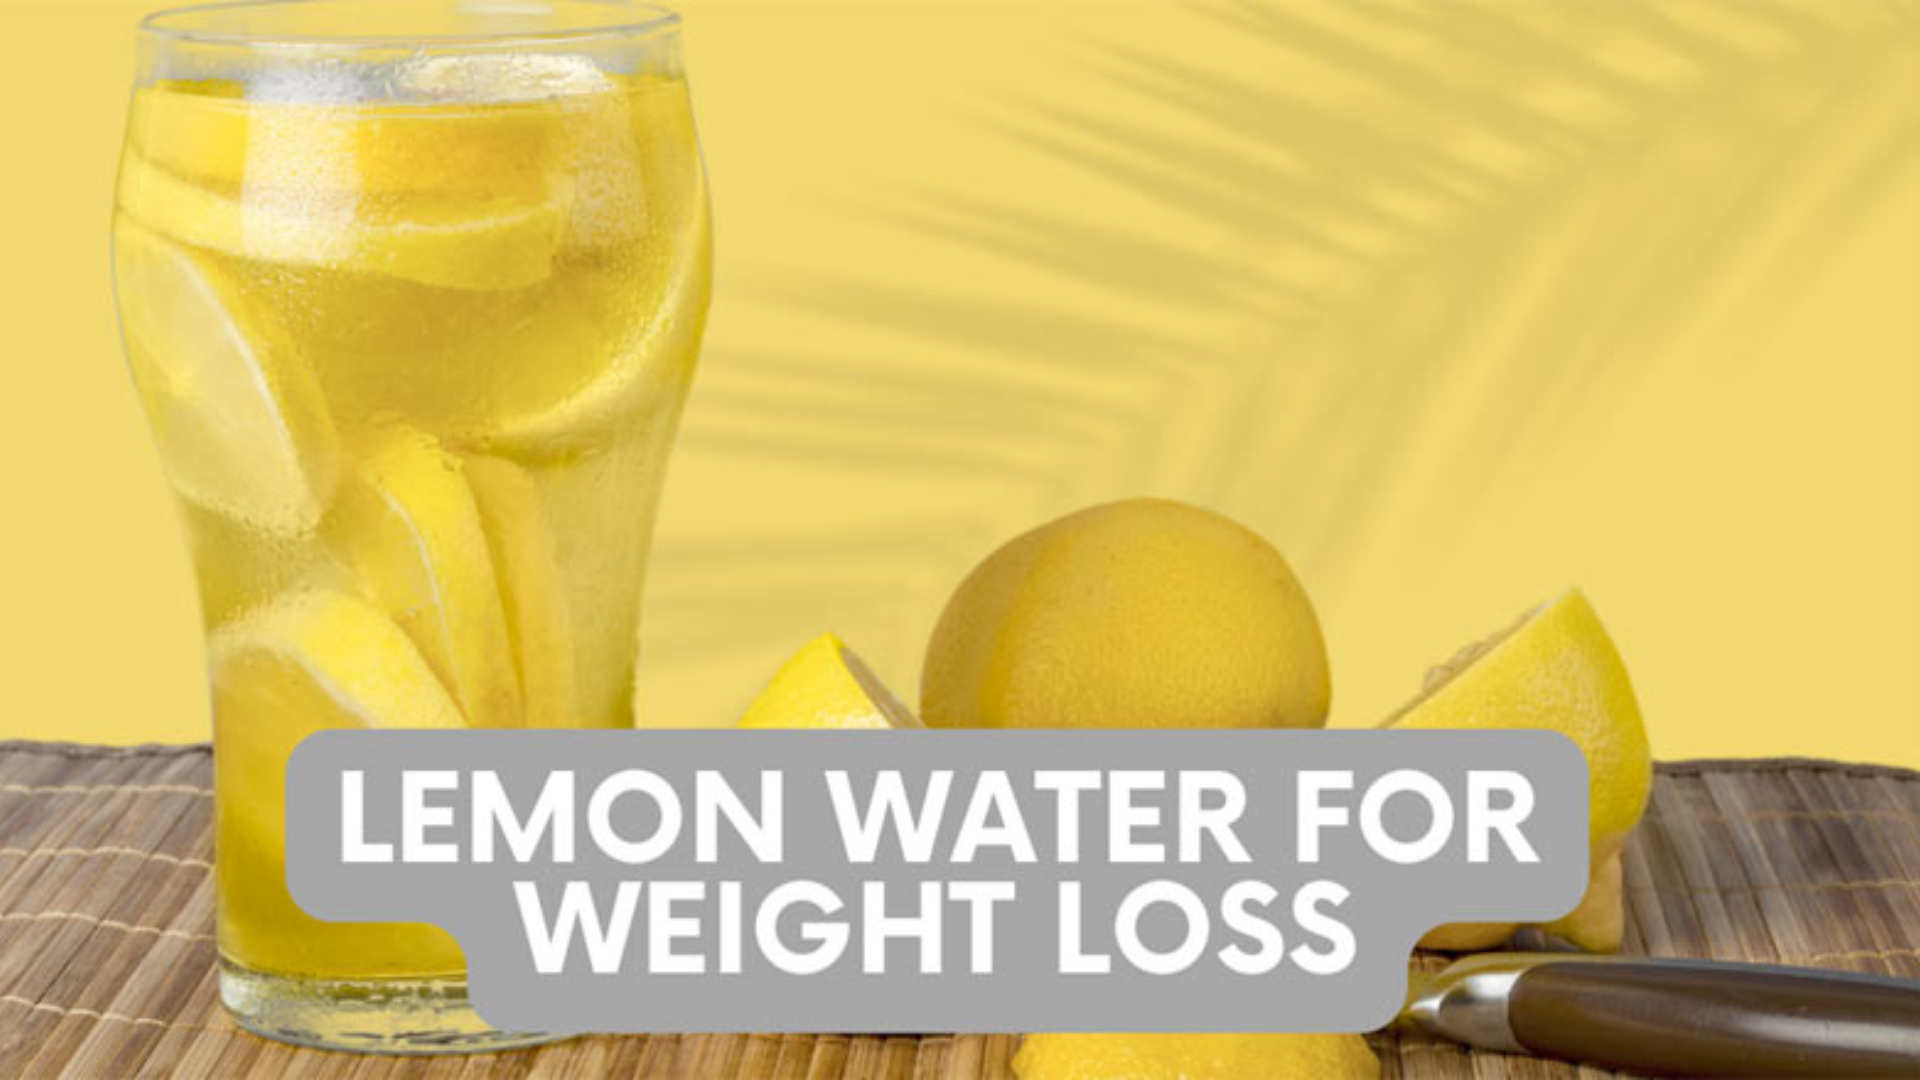 How Does Lemon Water Help with Weight Loss